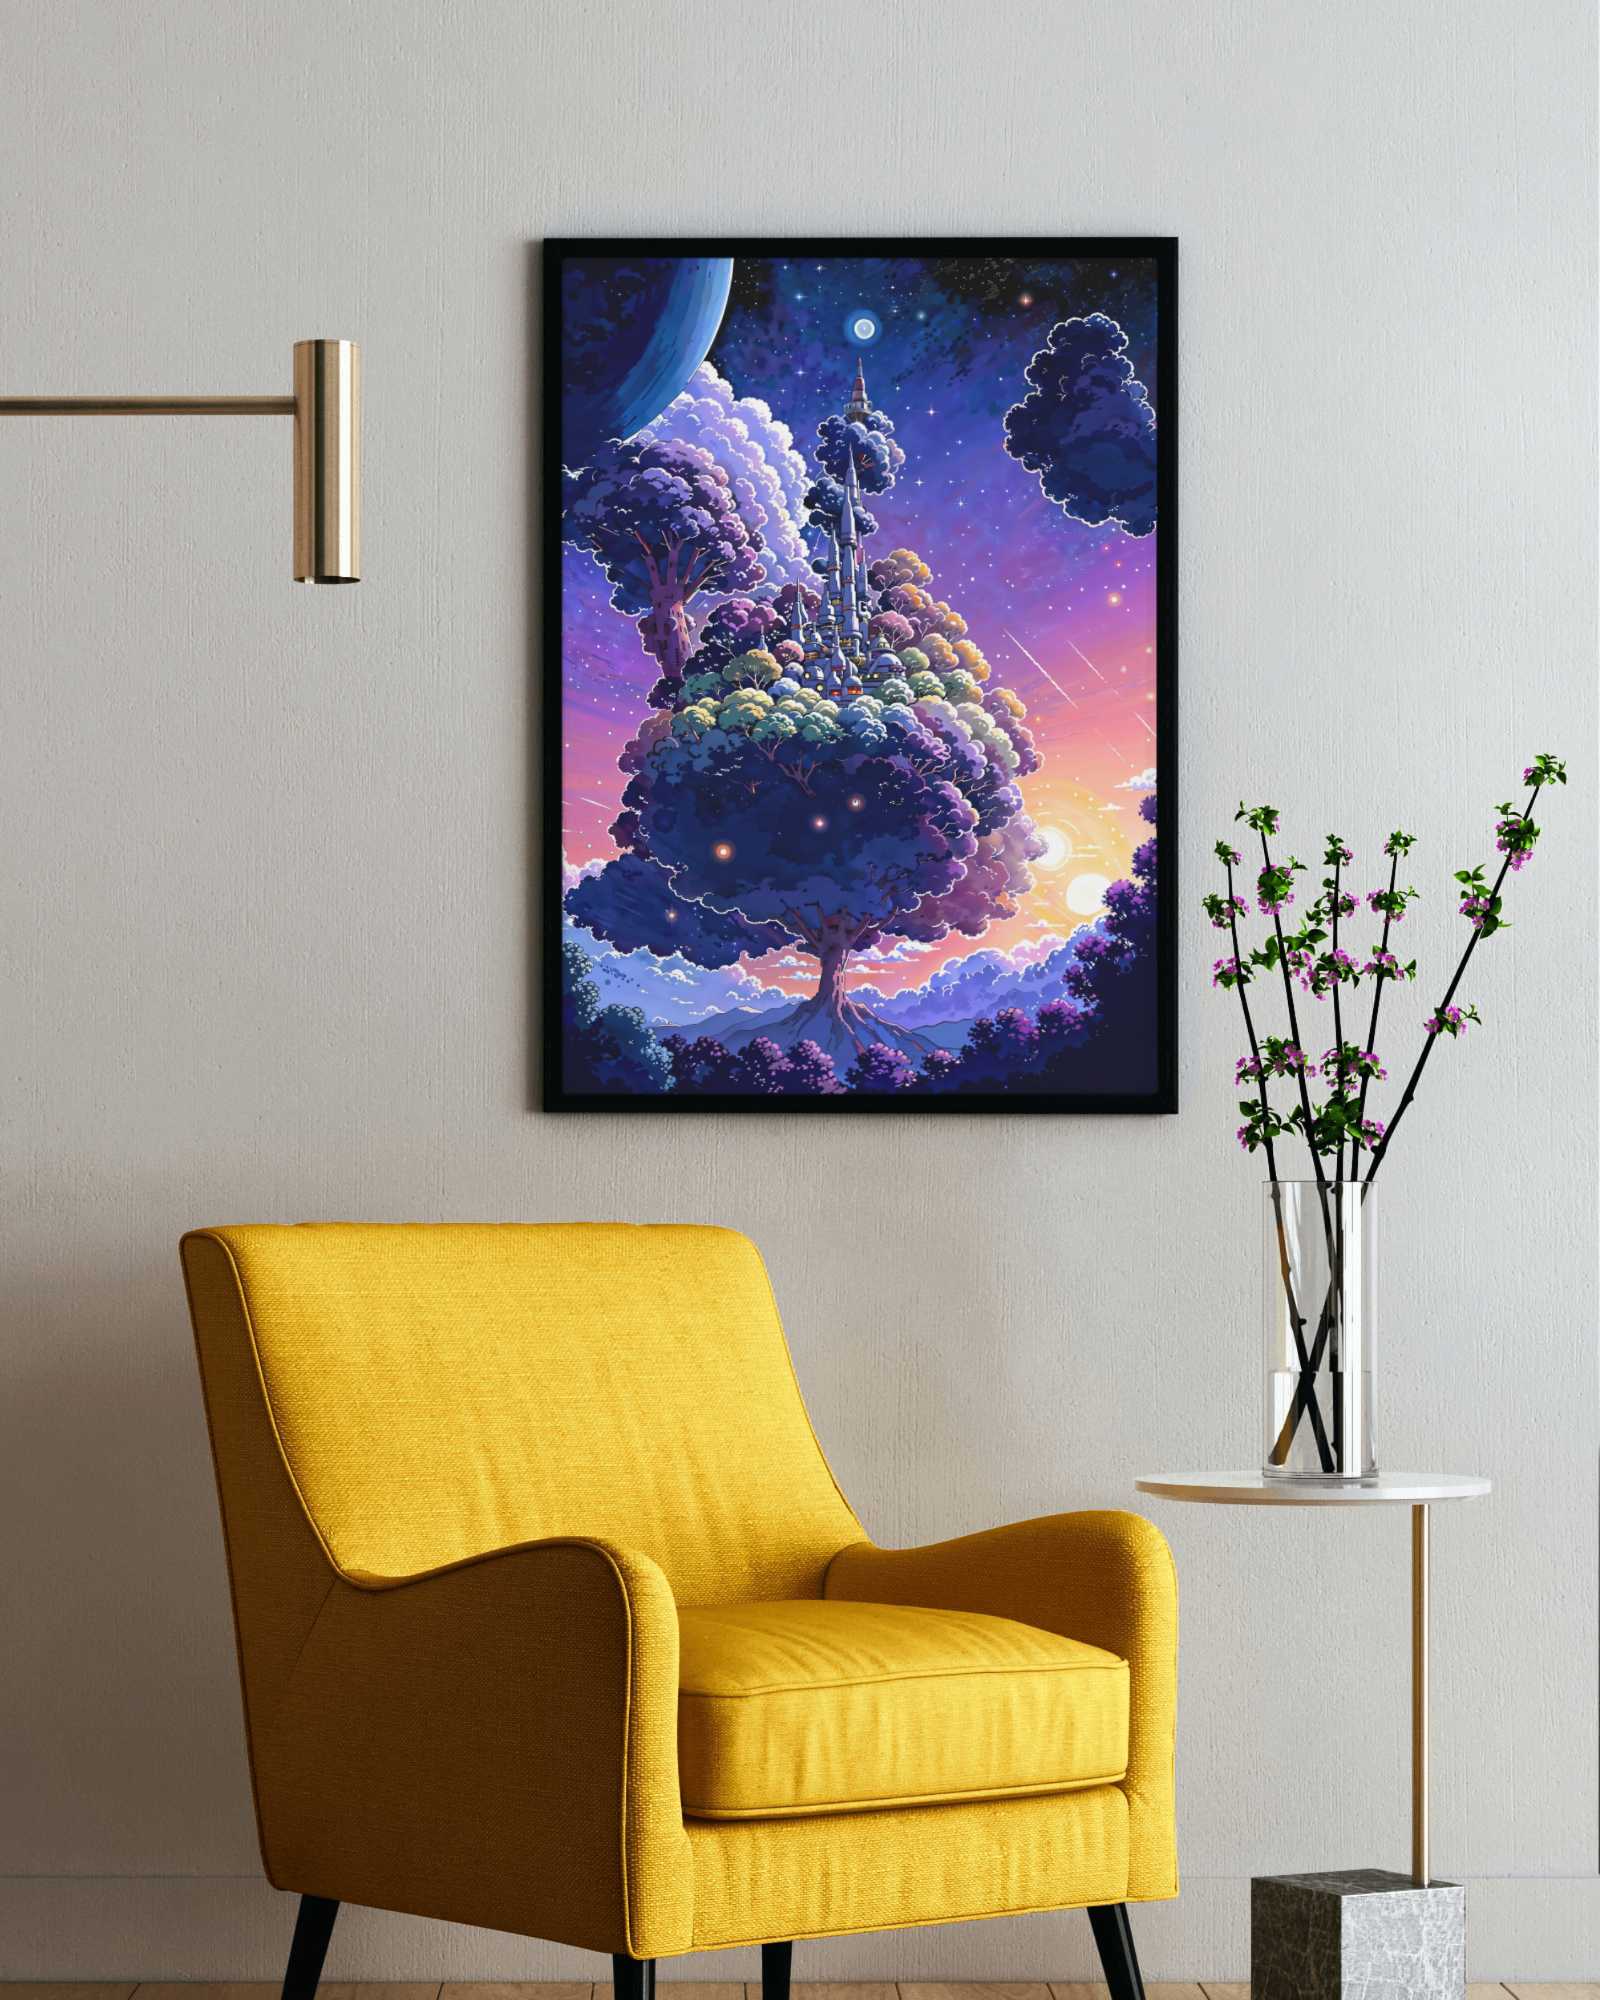 Future city of nature - Poster - Ever colorful